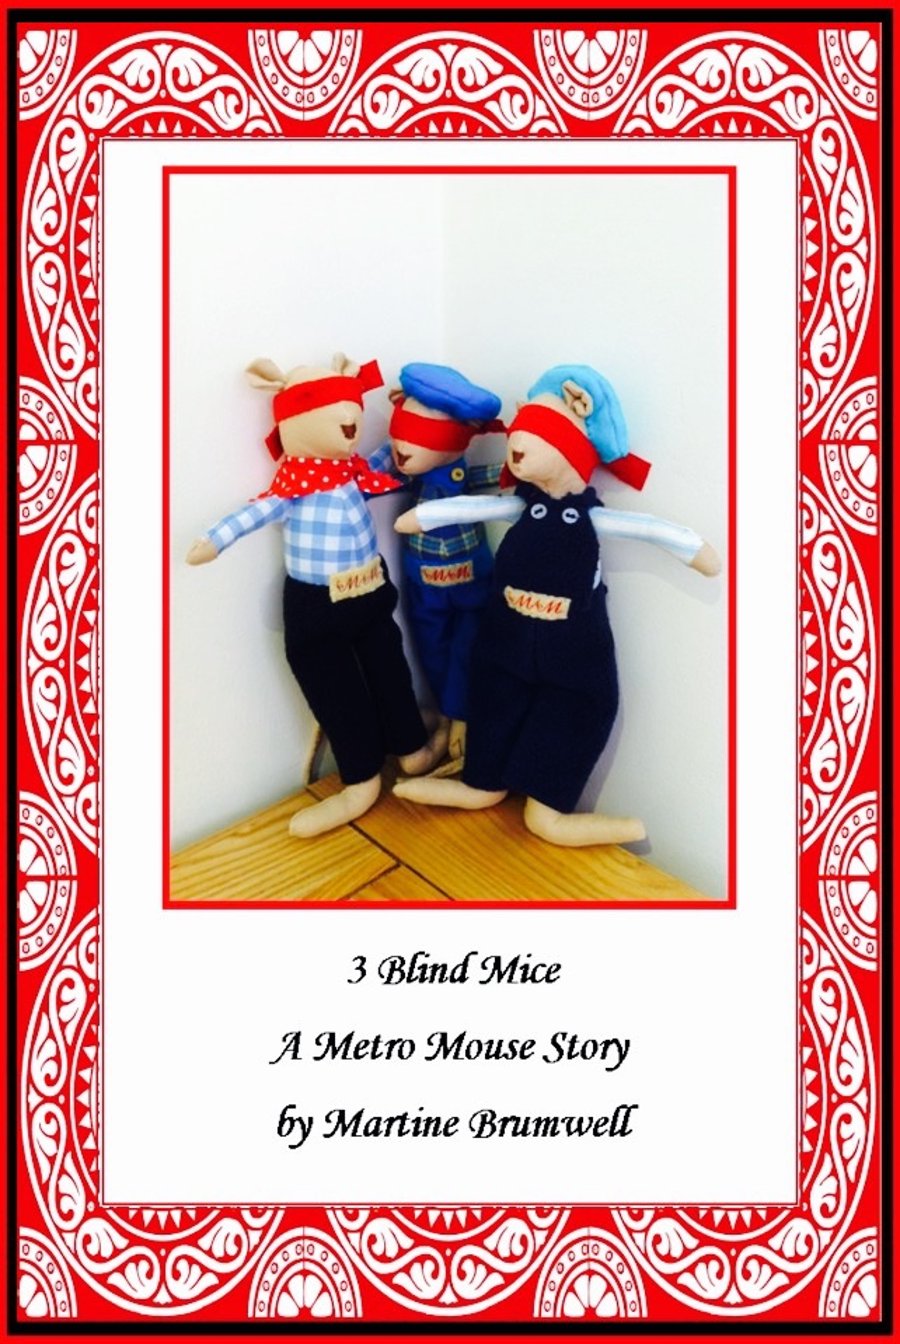 3 Blind Mice story